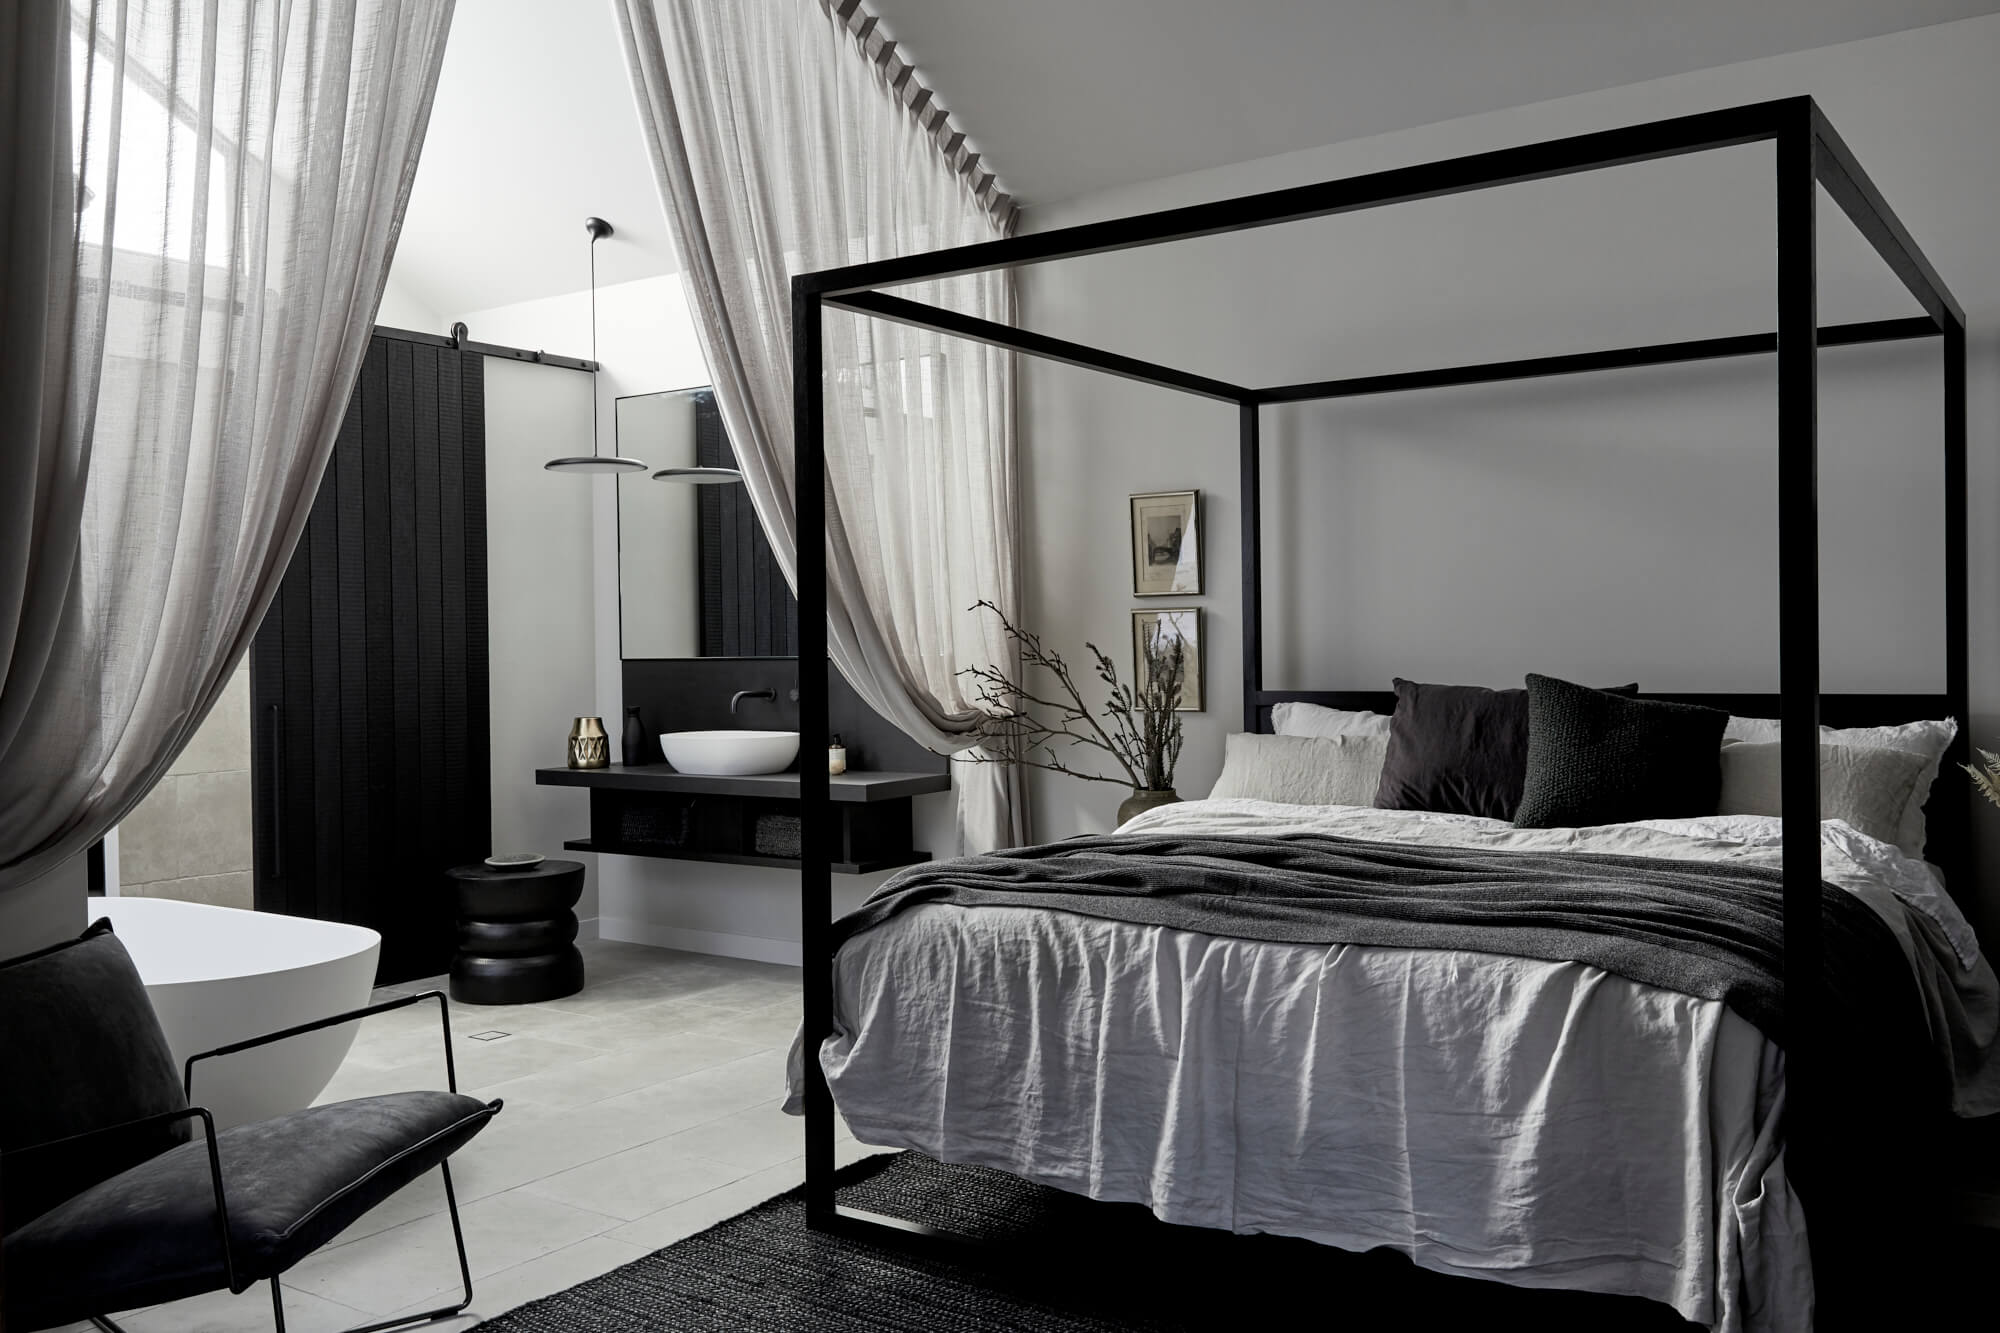 Interior of the Bower Studios, The Bower Byron Bay hotel with black timber four-poster bed, floor to ceiling curtains, luxury linens and open ensuite